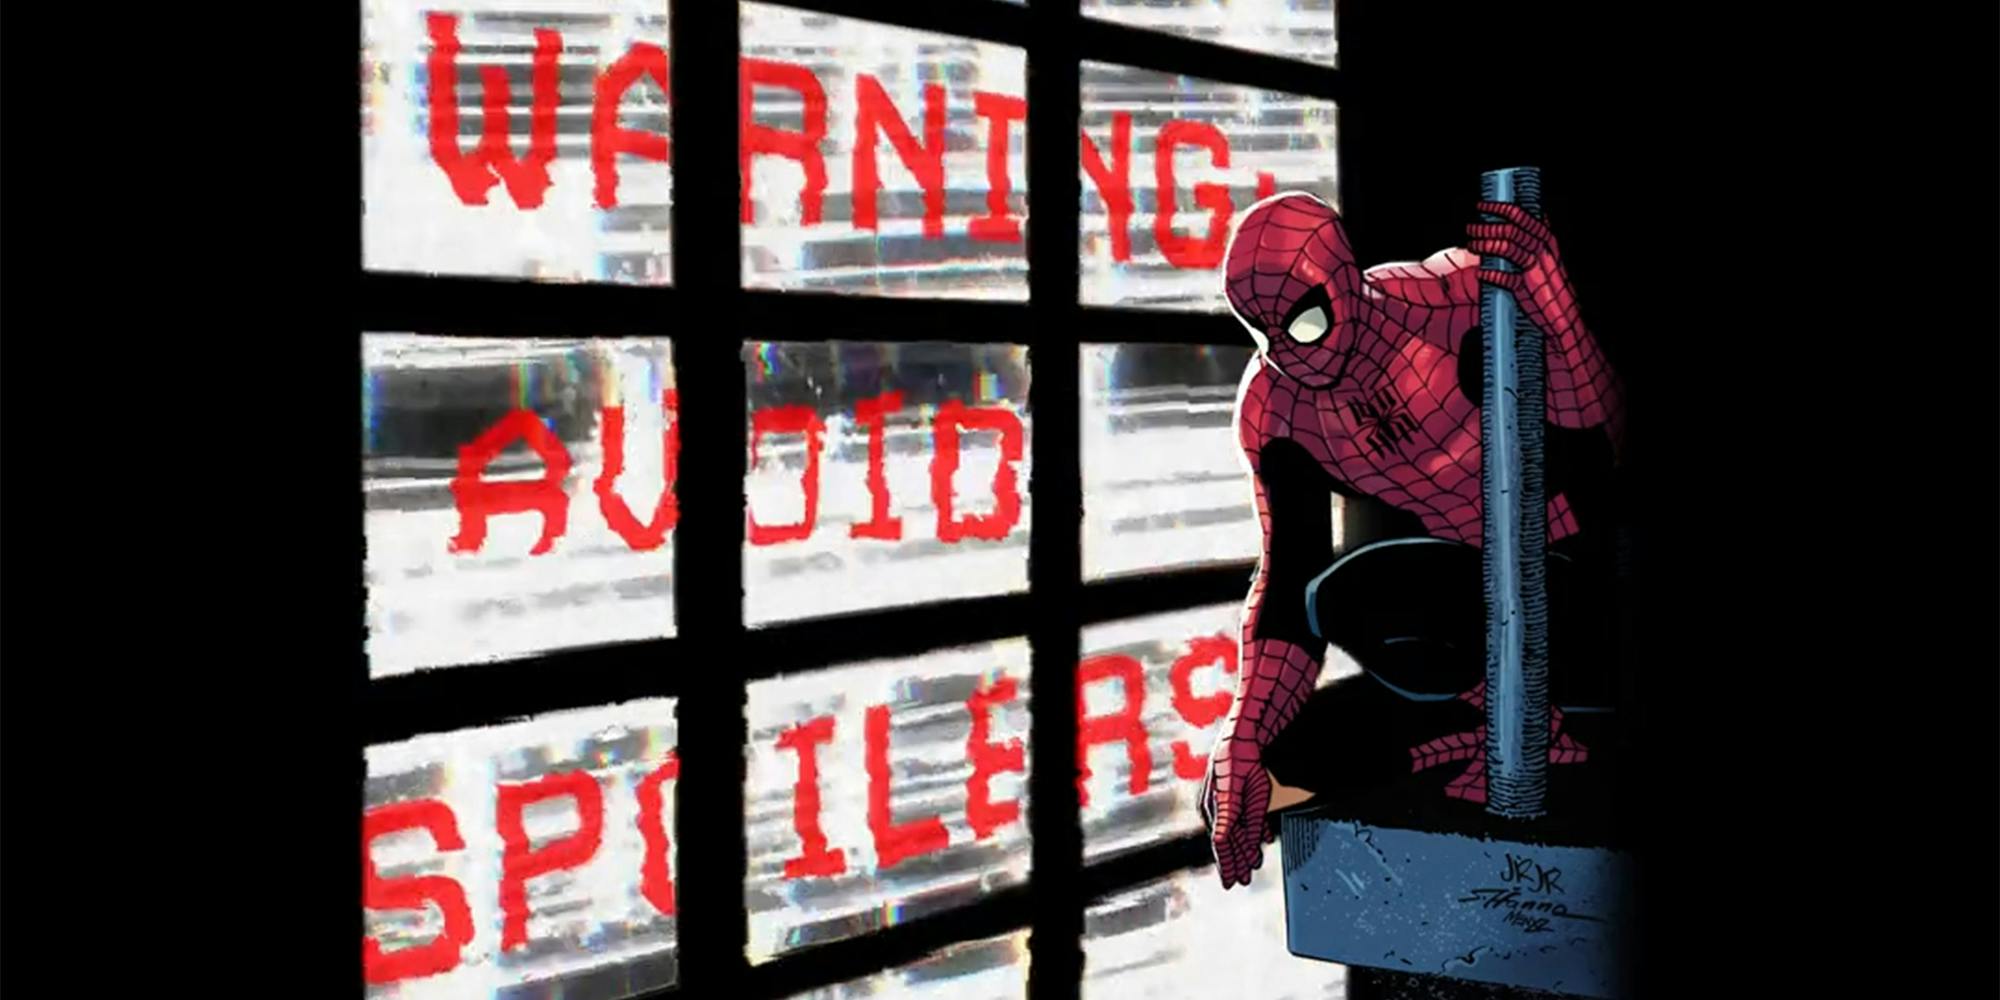 Spider Man with "Warning: Avoid spoilers" on television sets